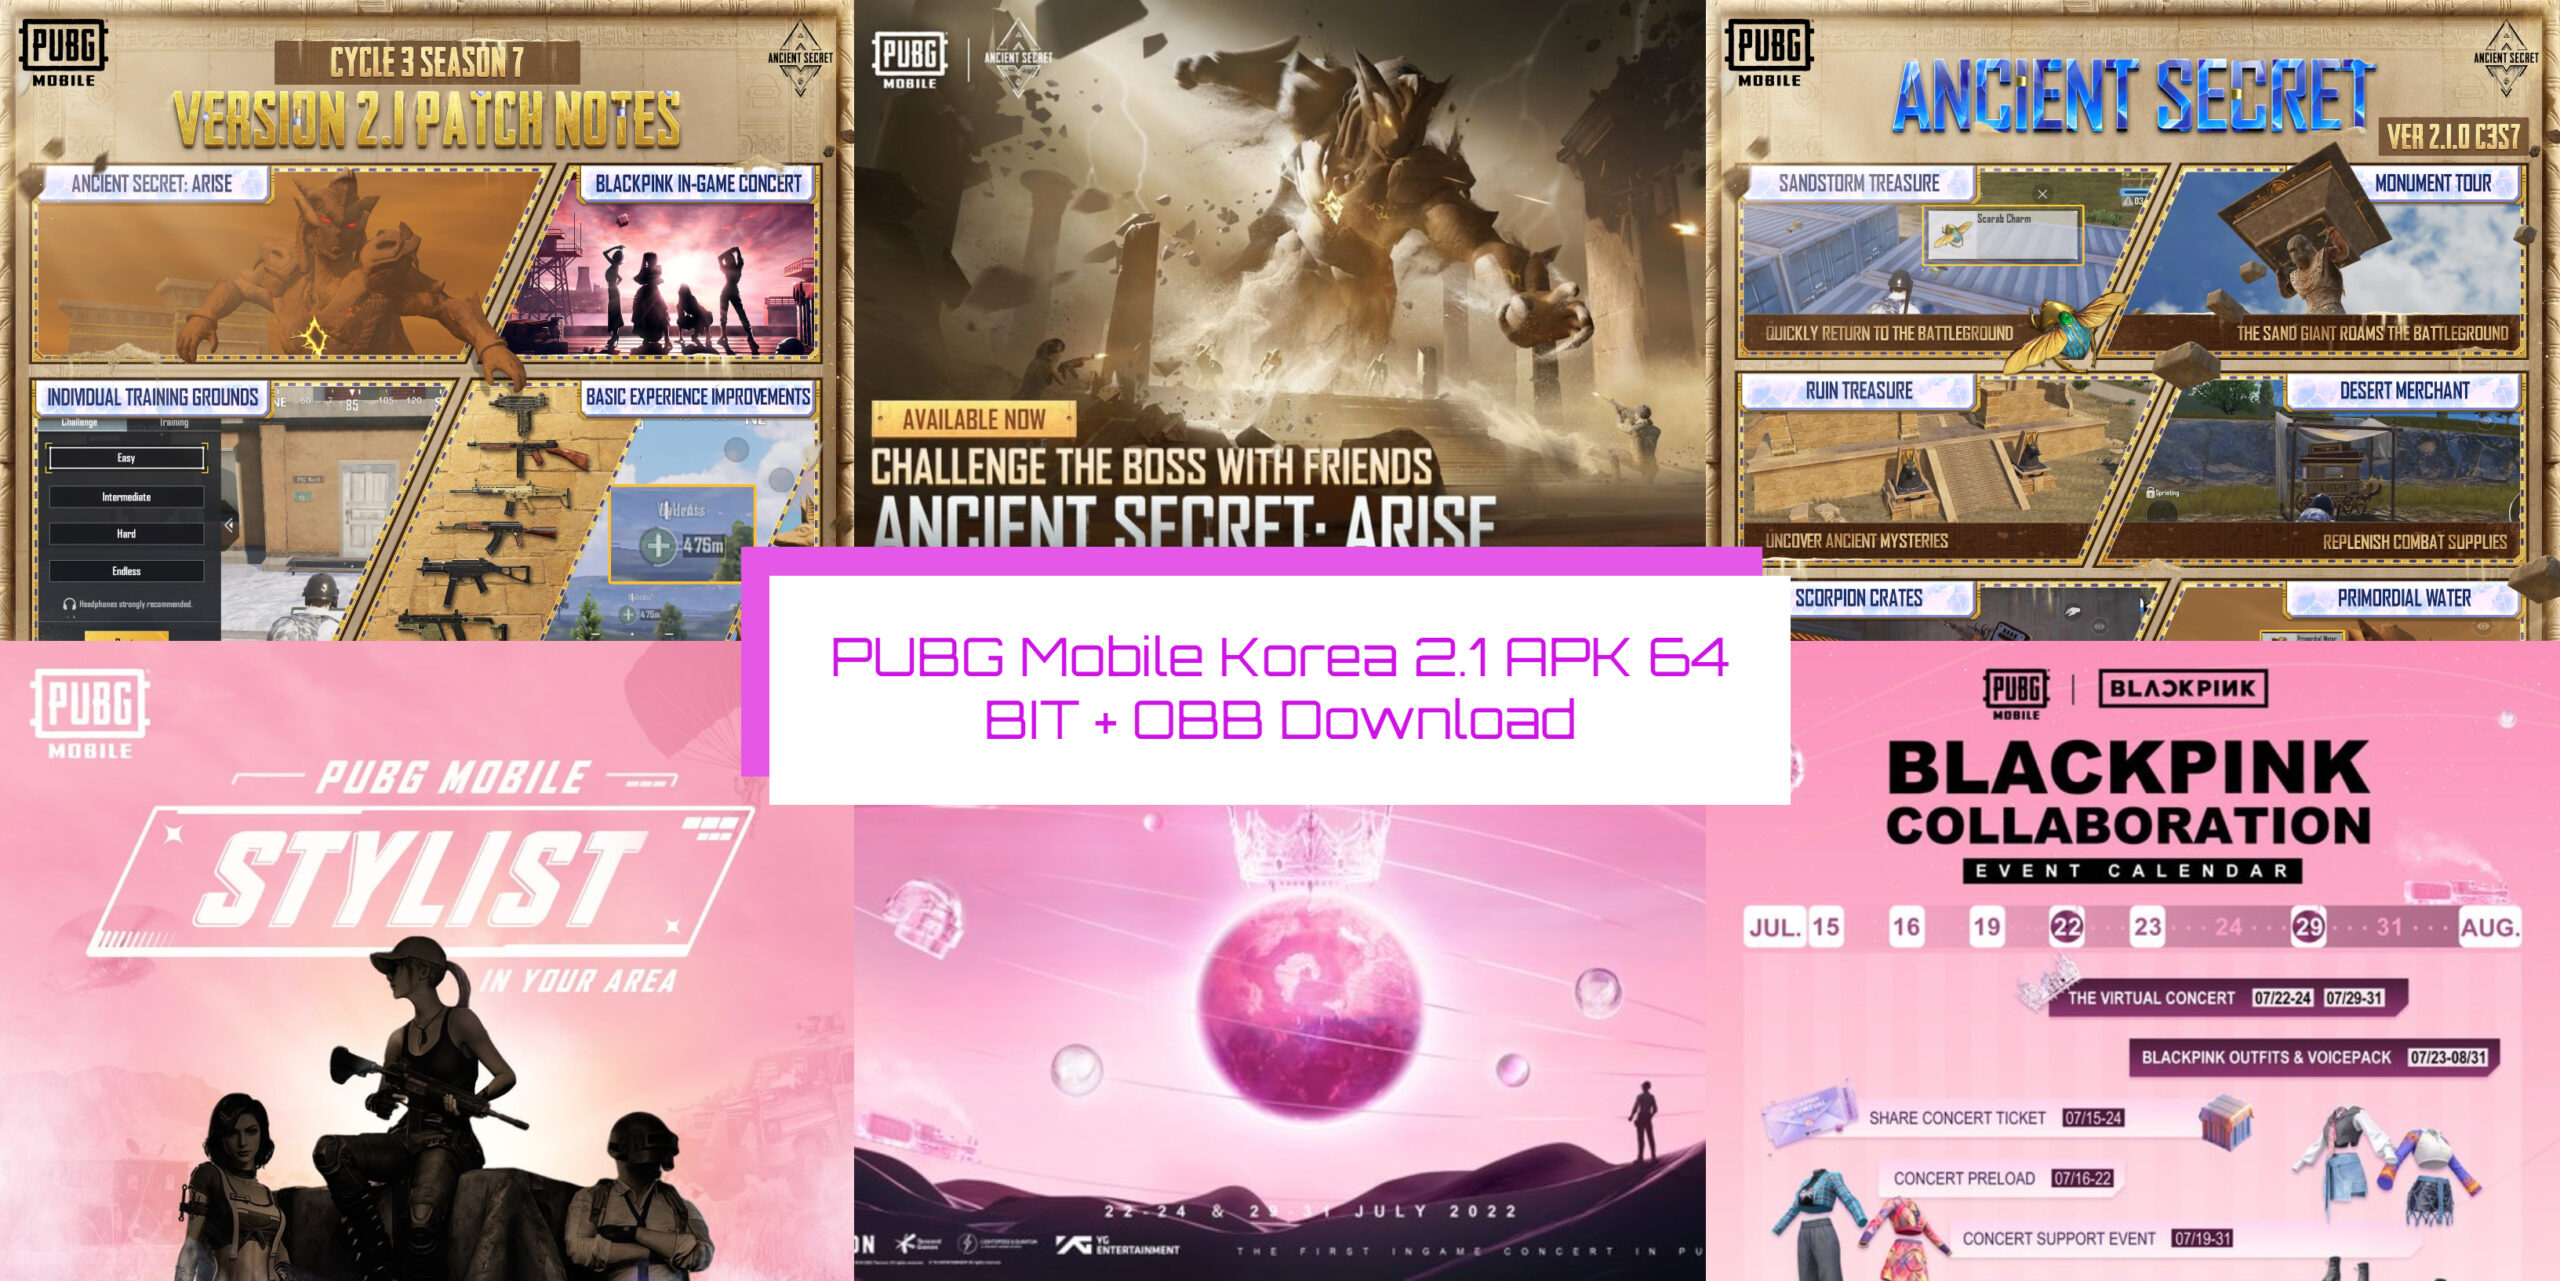 You are currently viewing PUBG Mobile Korea 2.1.0 APK 64 BIT + OBB Download